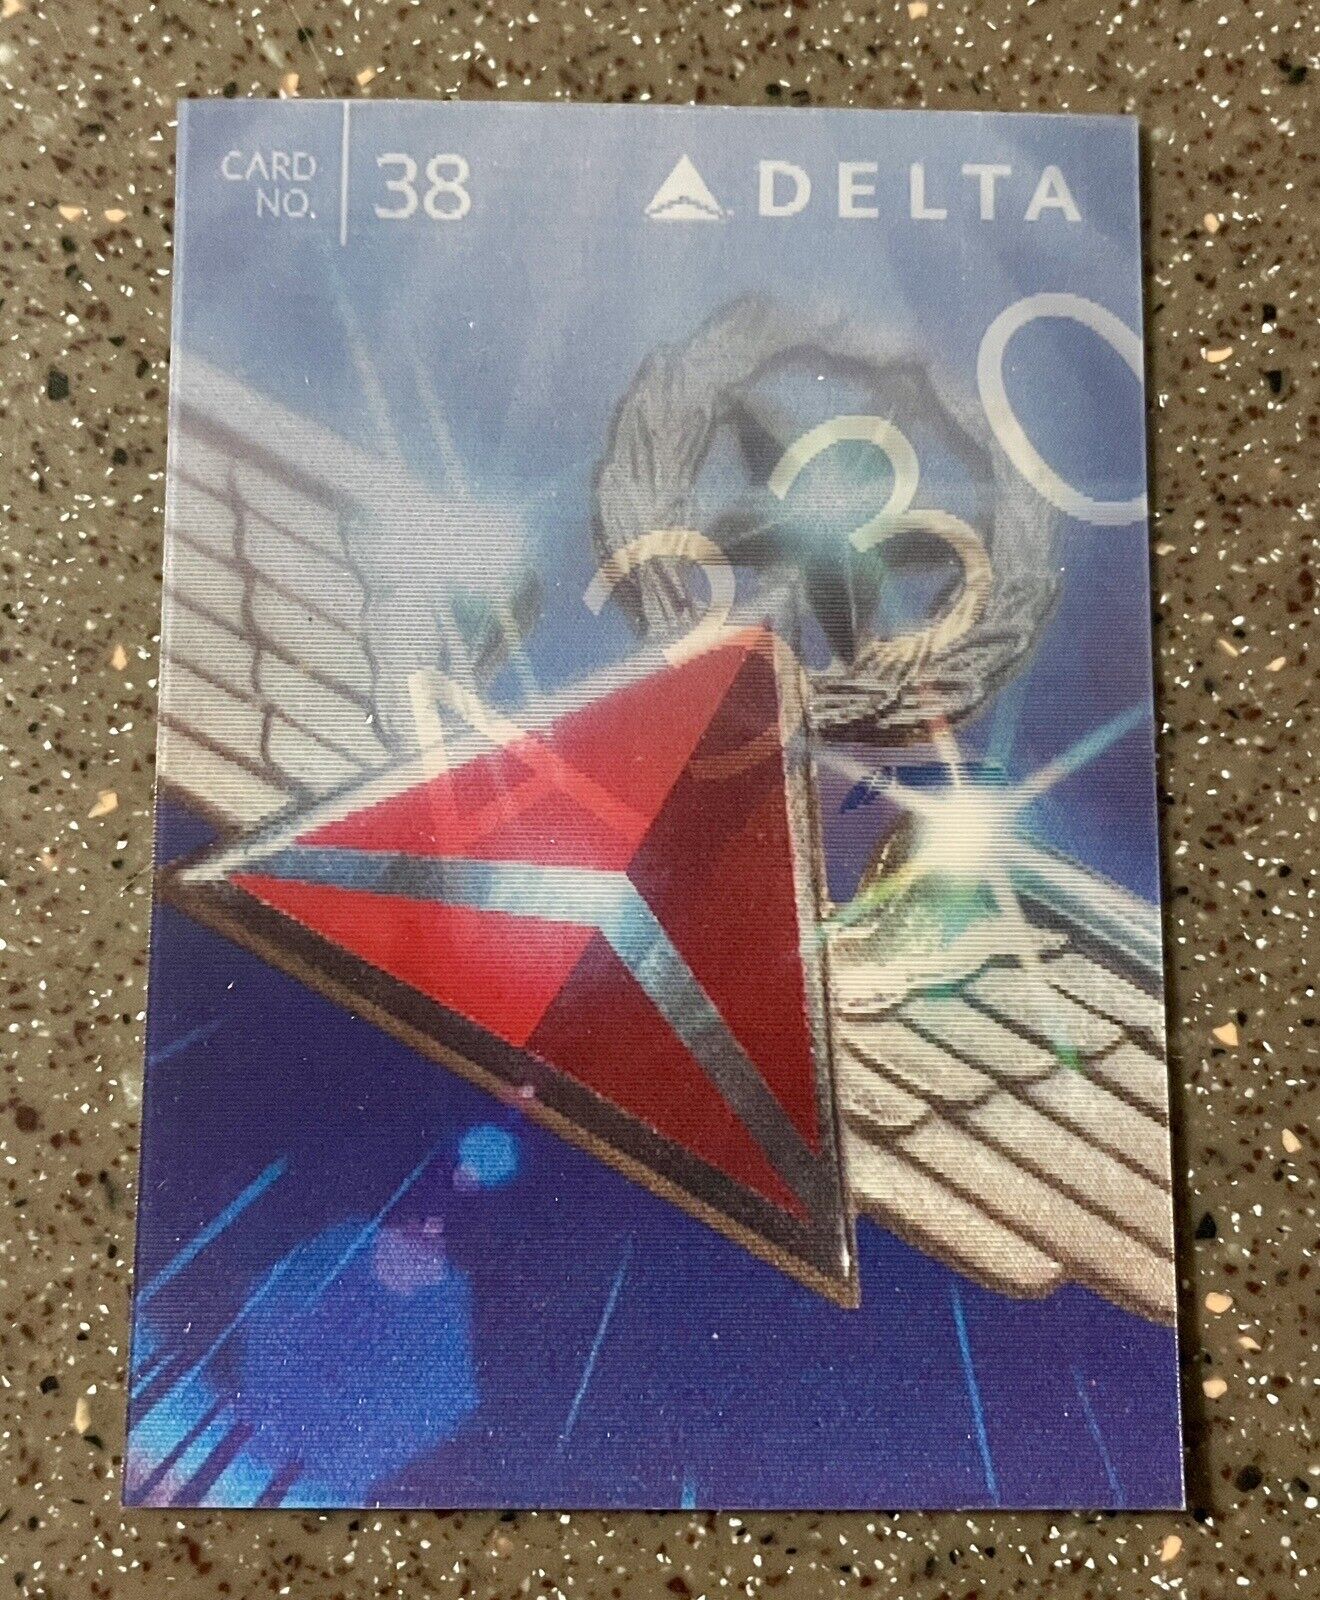 Delta Air Lines Pilot Trading Card from 2015, #38 Airbus A330-300